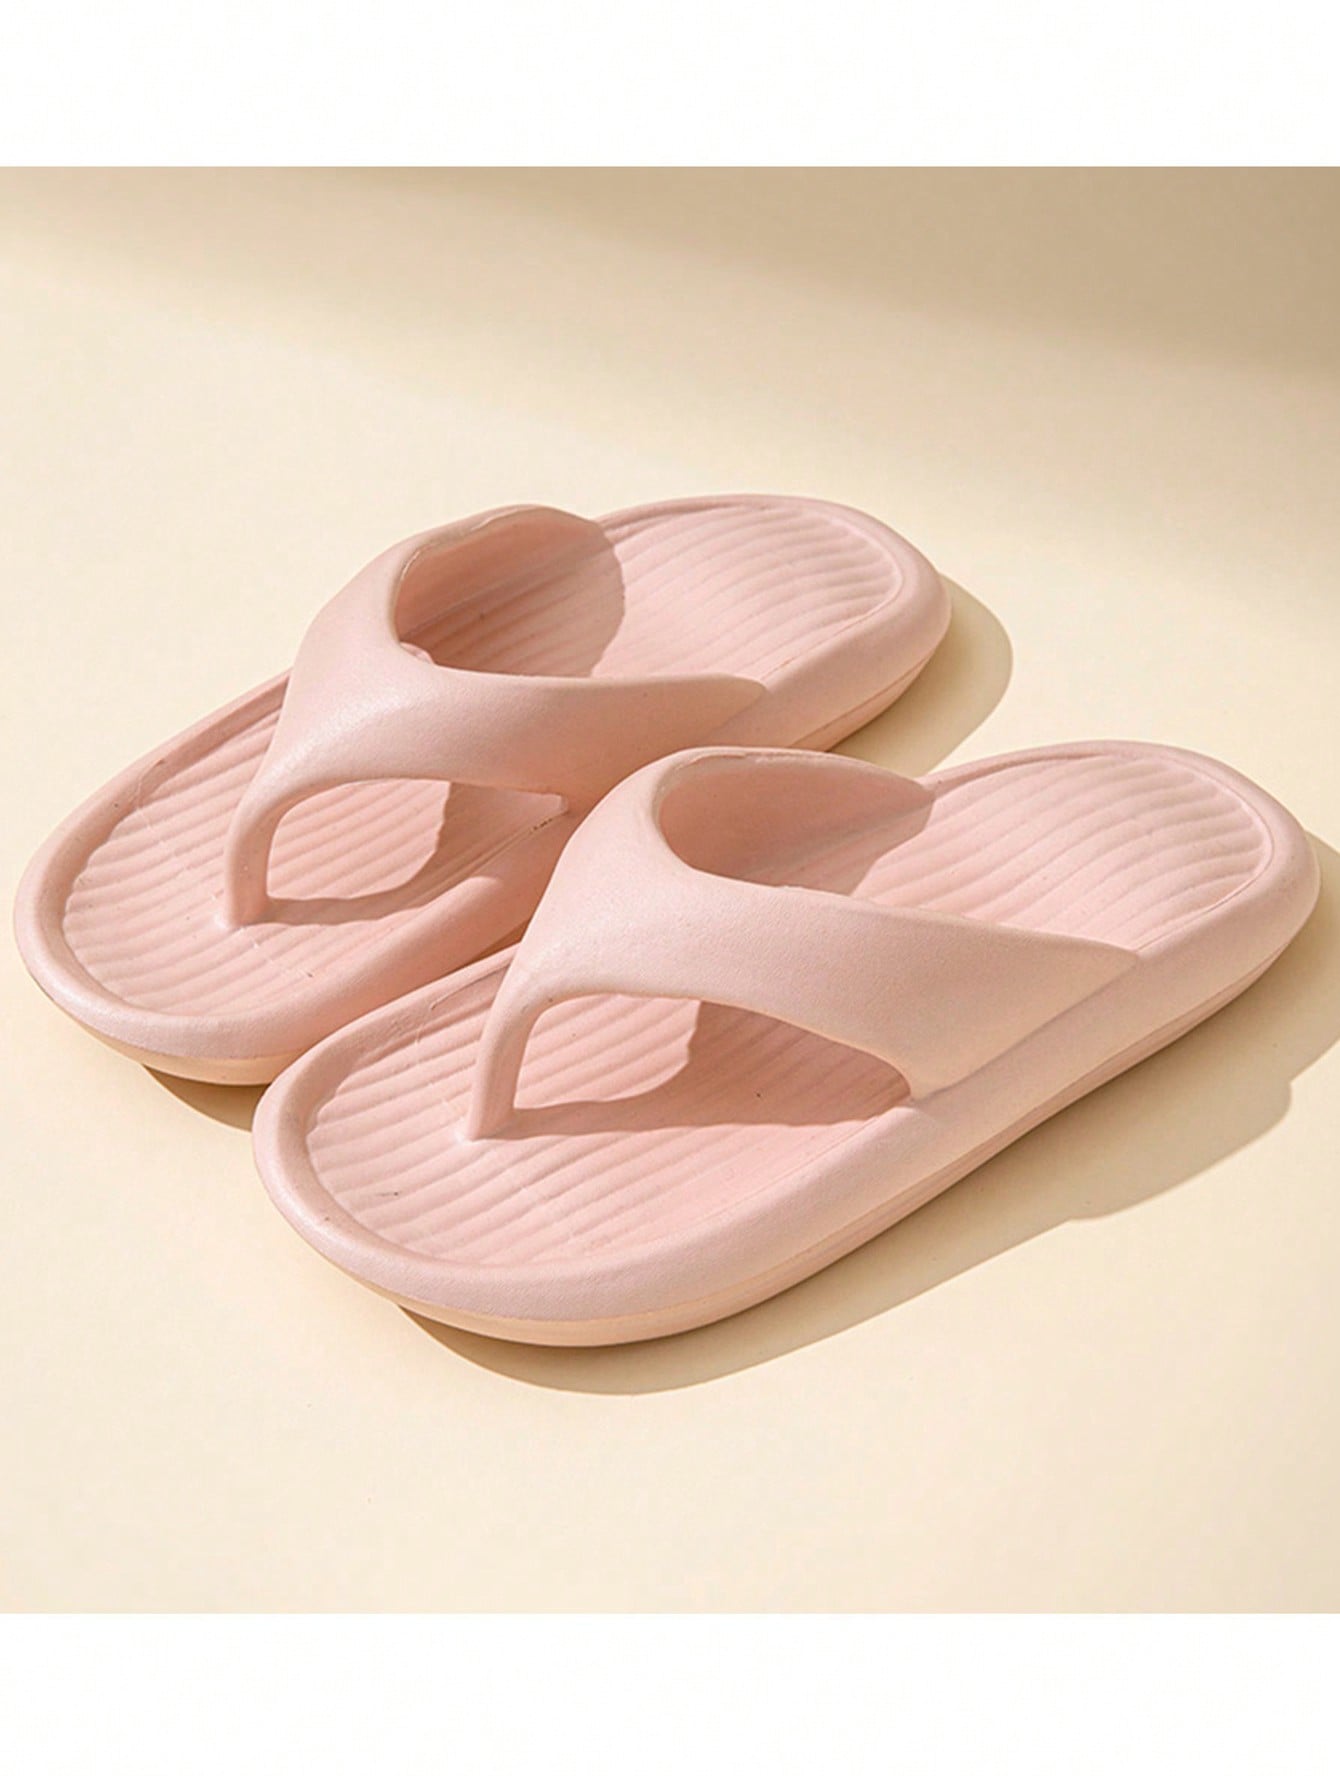 1pair Anti-Slip Thicker Soft Bottom Flip-Flops For Women, Perfect For Bathroom And Beach-Pink-1